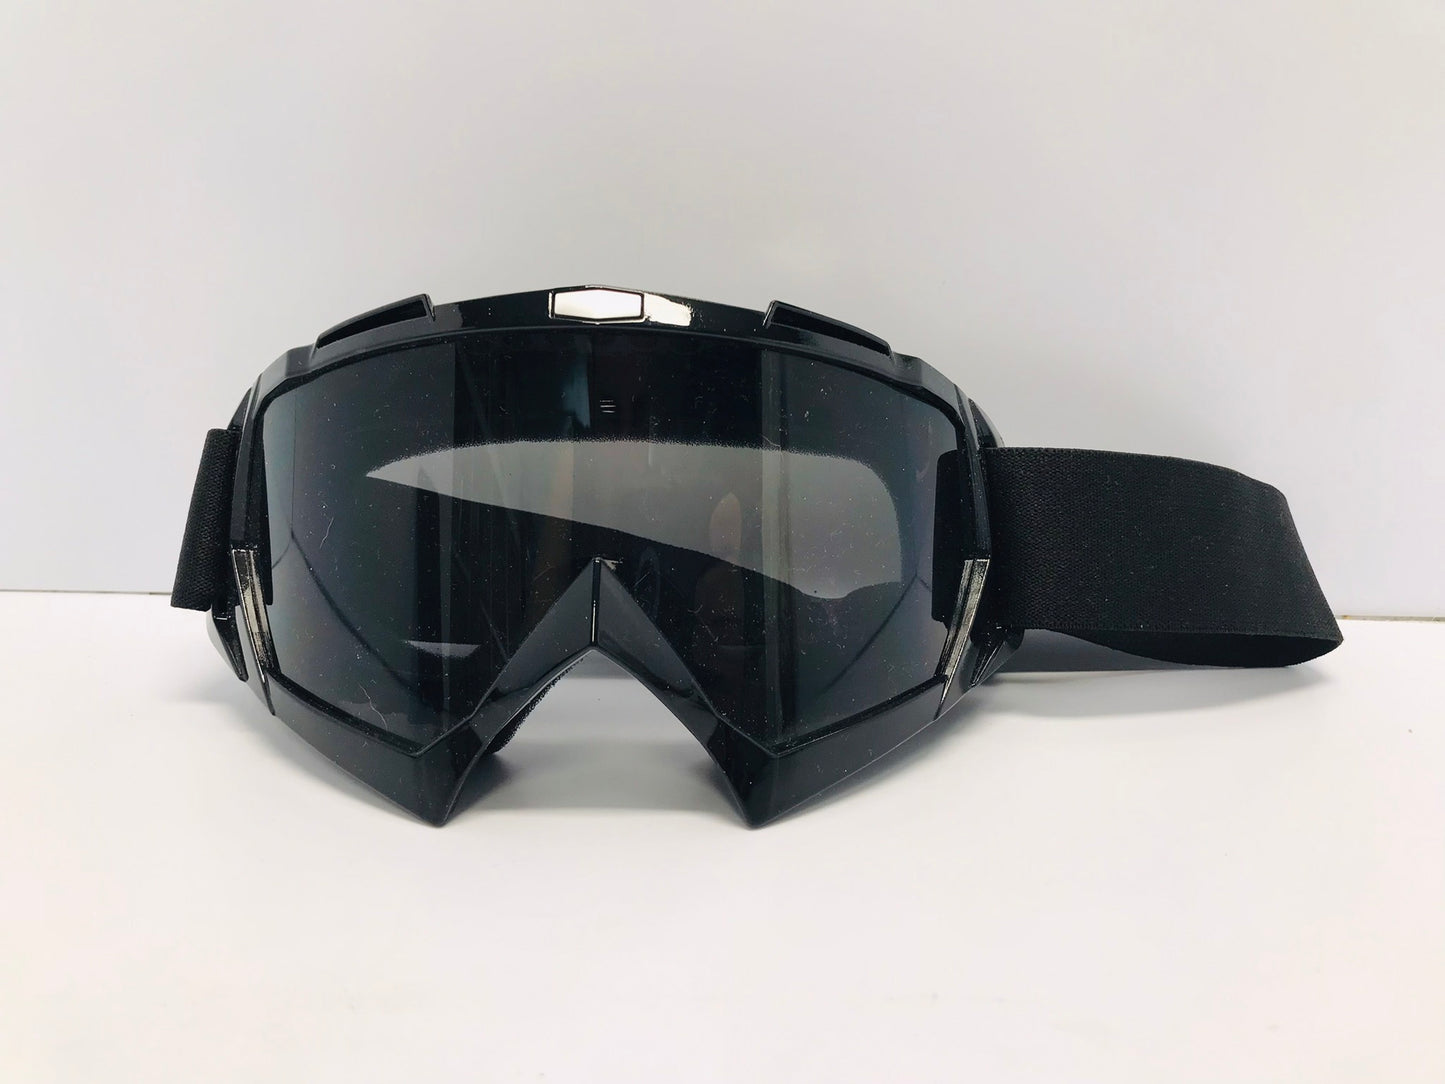 Motocross Motorcycle Dirt Bike Men's Size Large Goggles Like New Outstanding Quality